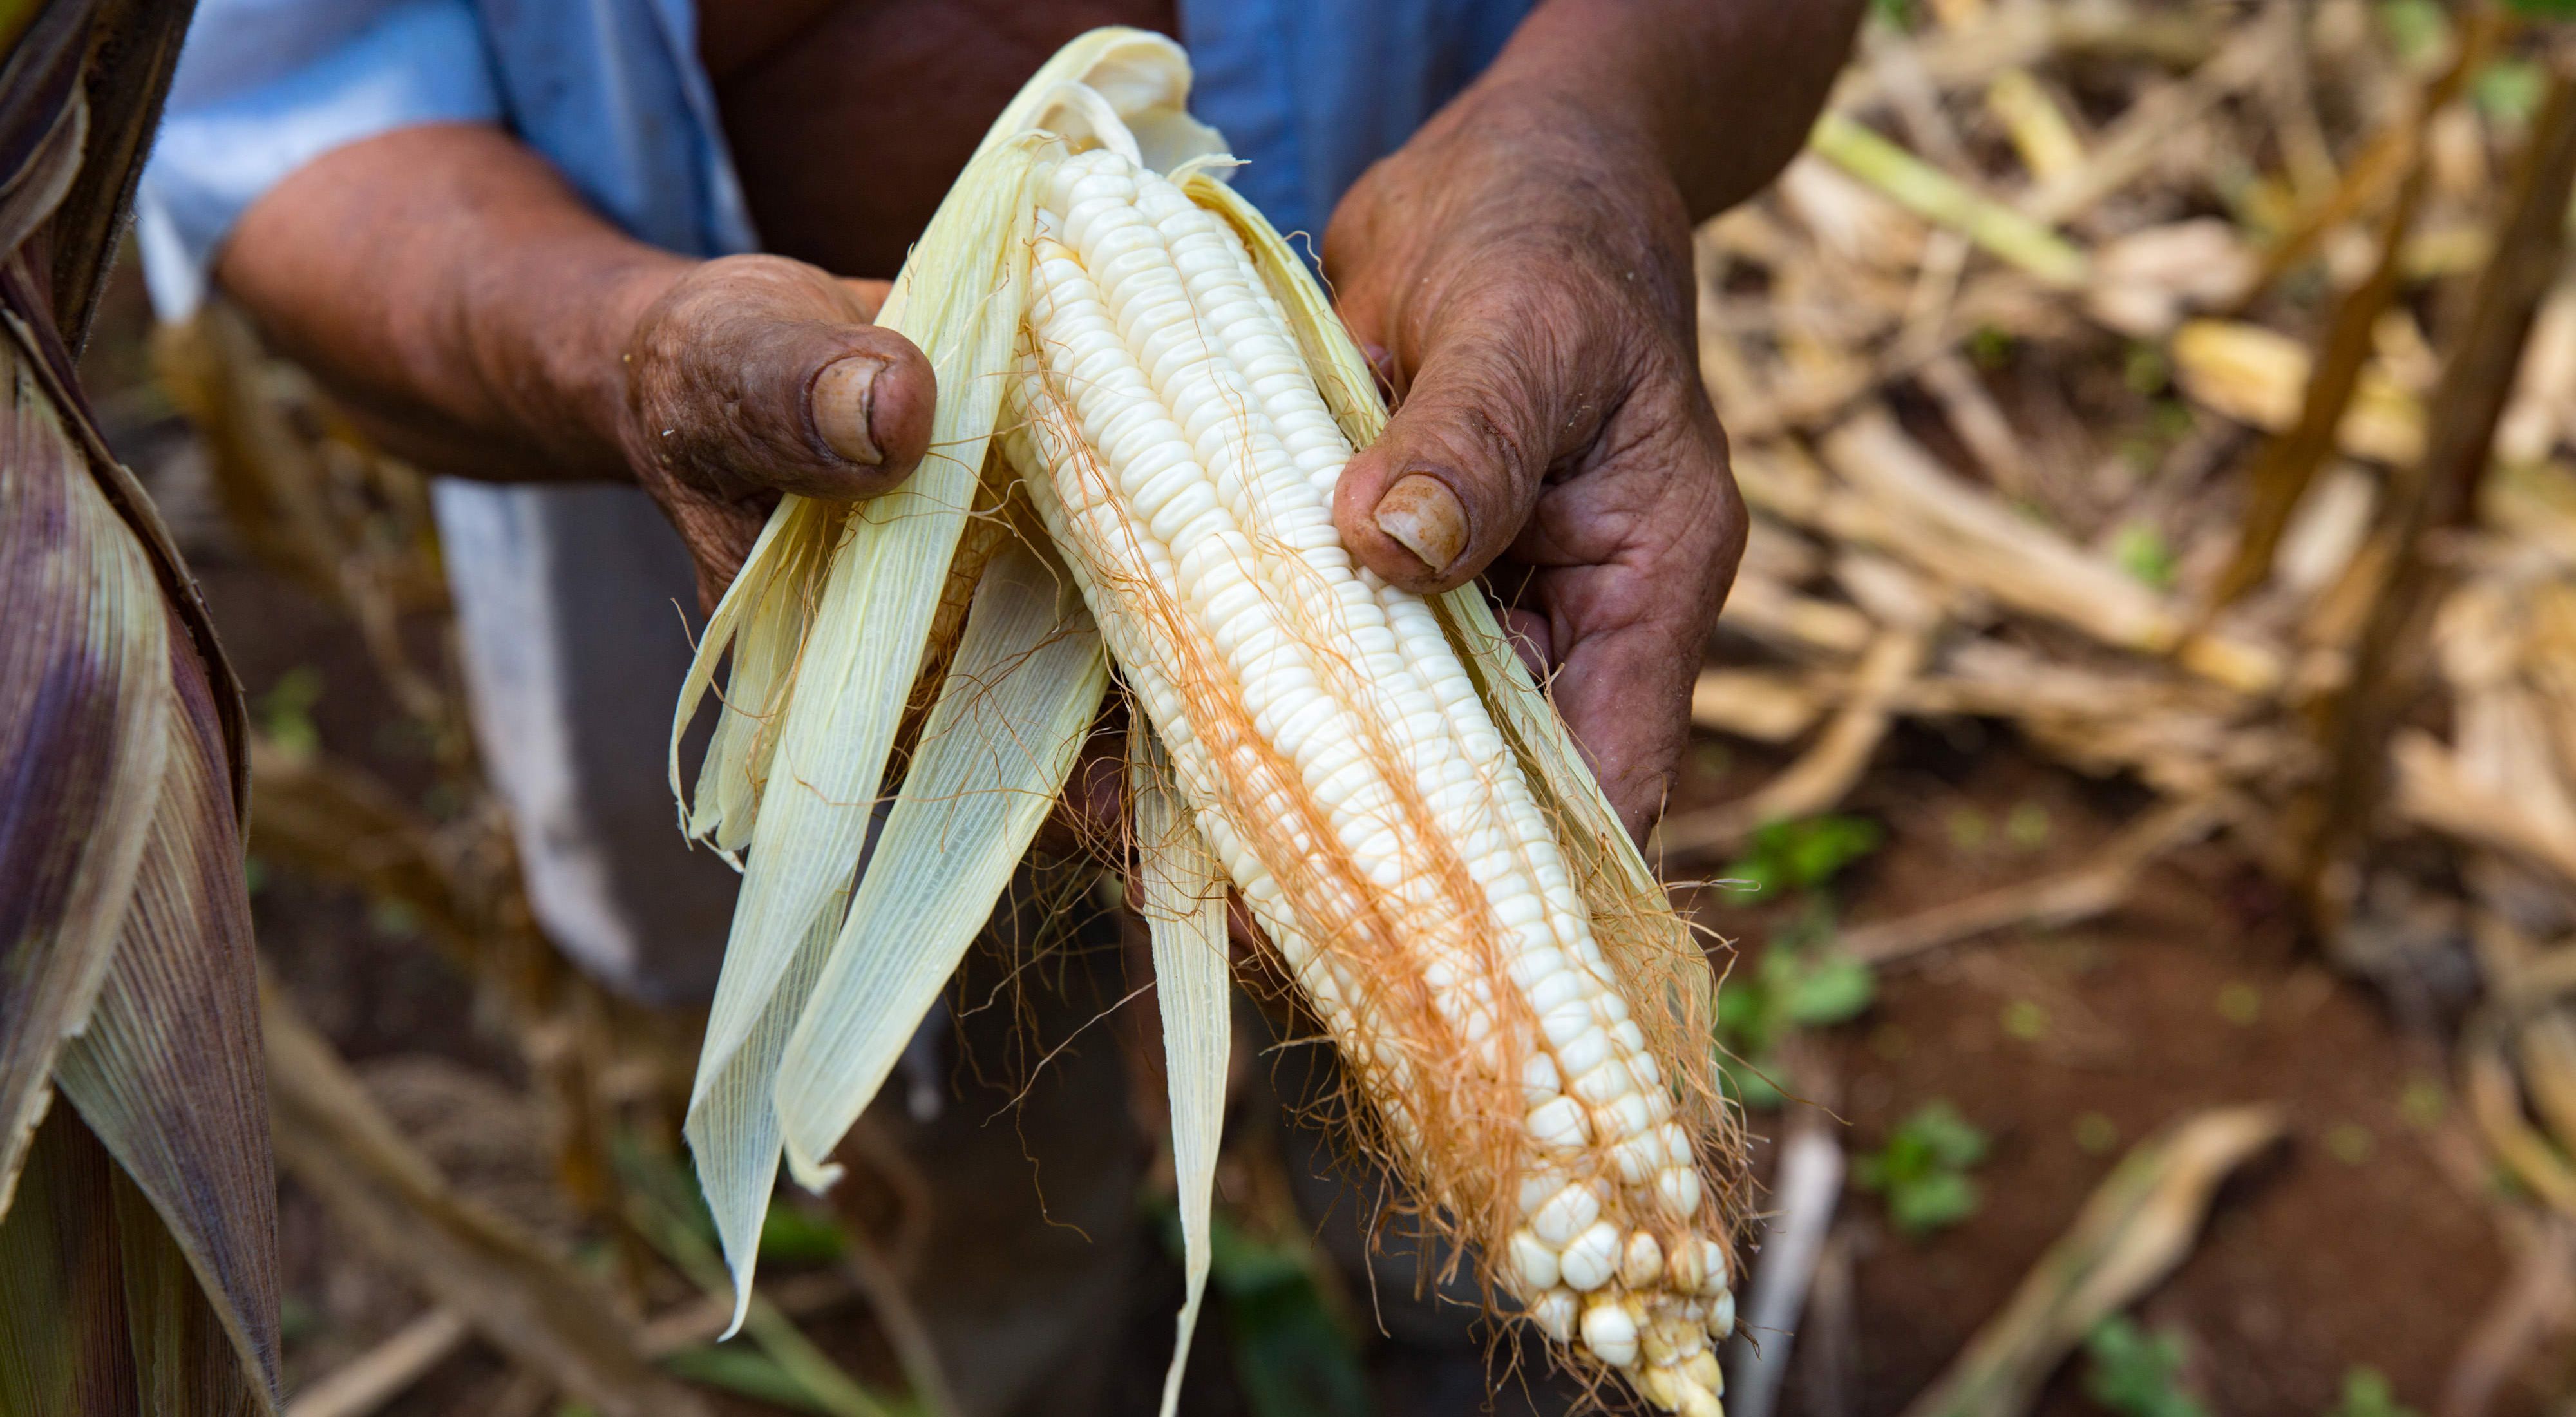 October 2016. 79-year-old Dionisio Yam Moo checks on his corn in his "milpa" personal agricultural field. He has adopted his own method of conservation agriculture planting beans high in nitrogen below his corn plants. The Nature Conservancy works with landowners, communities, and governments in Mexico to promote low-carbon rural development through the design and implementation of improved policy and practice in agriculture, ranching, and forestry. The Conservancy is leading the initiative, Mexico REDD+ Program in conjunction with the Rainforest Alliance, the Woods Hole Research Center, and Espacios Naturales y Desarrollo Sustentable. Photo credit: © Erich Schlegel    